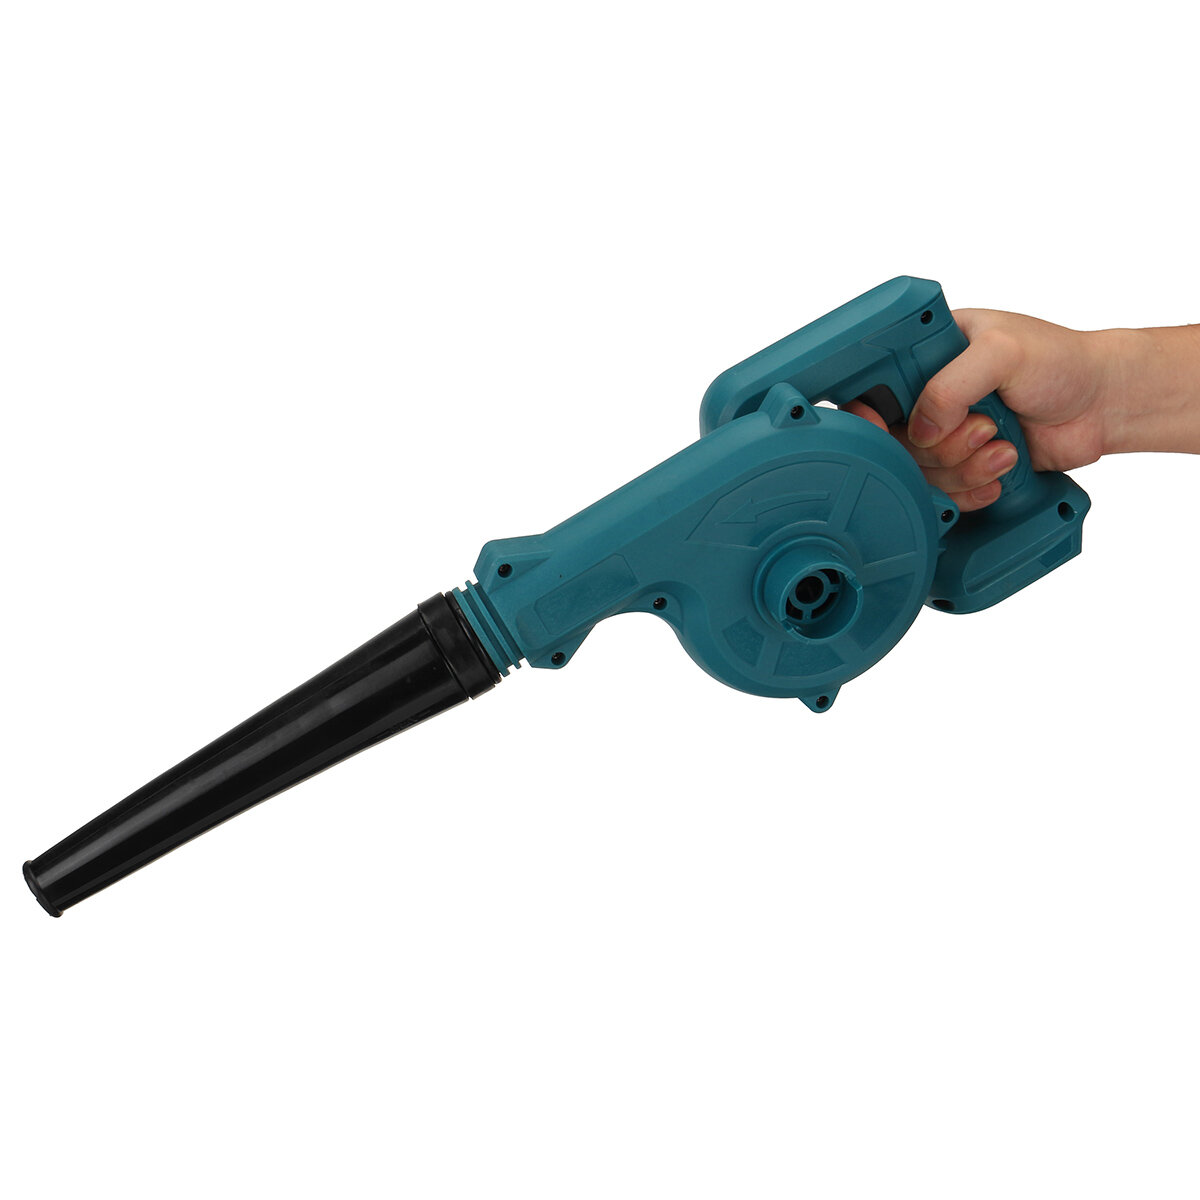 18V Cordless Electric Air Blower Vacuum Cleaner Suction Blower Tool For Makita 18V Li-ion Battery